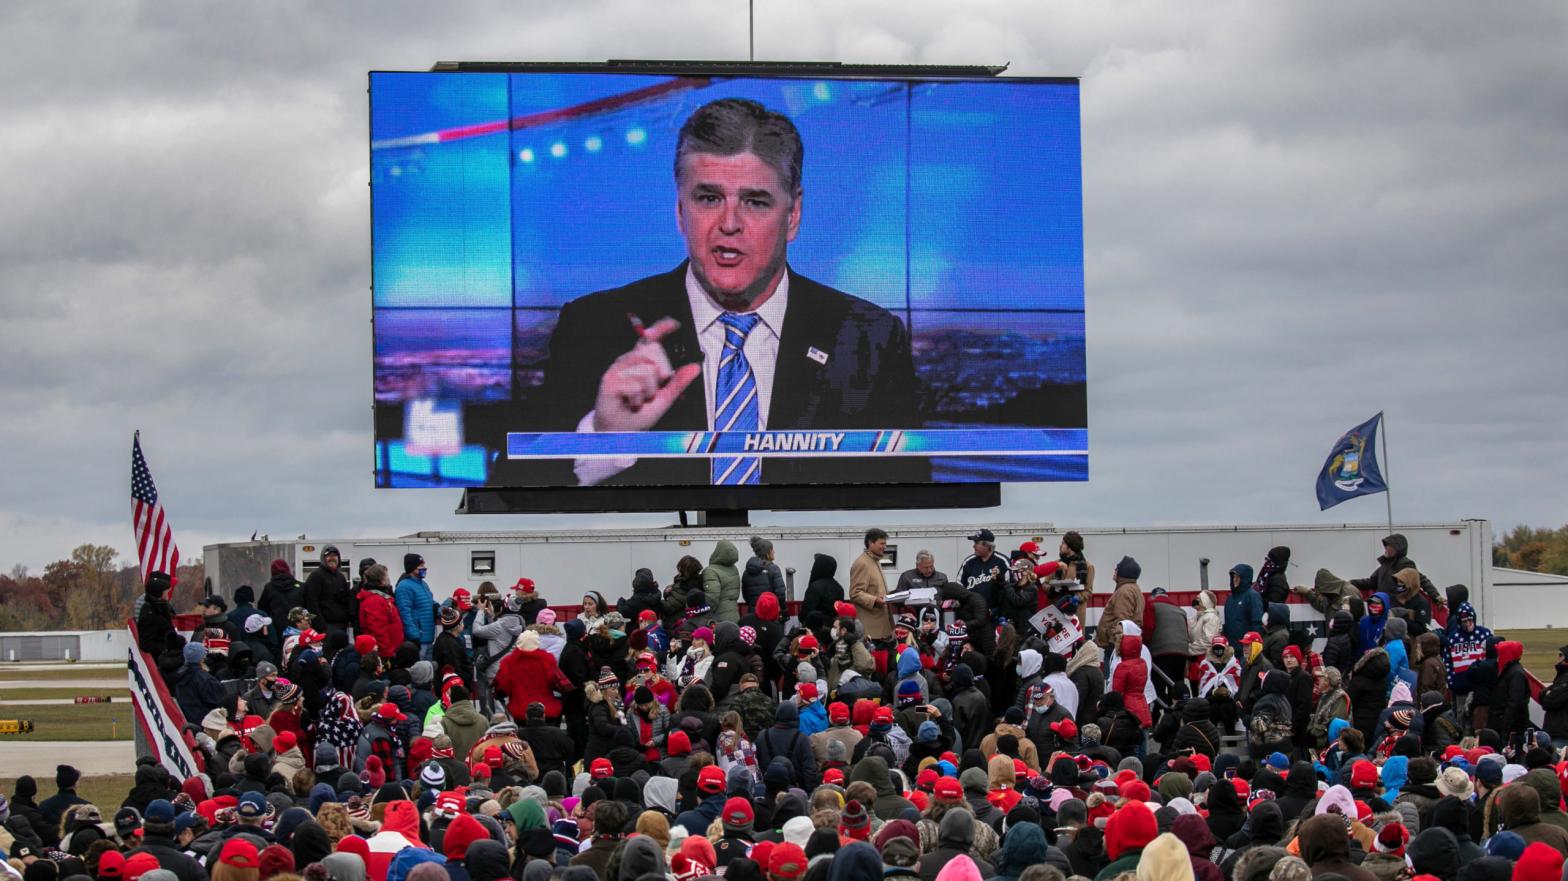 Supporters of U.S. President Donald Trump watch a video featuring Fox host Sean Hannity ahead of Trump's arrival to a campaign rally at Oakland County International Airport on October 30, 2020 in Waterford, Michigan.  (Photo: John Moore, Getty Images)